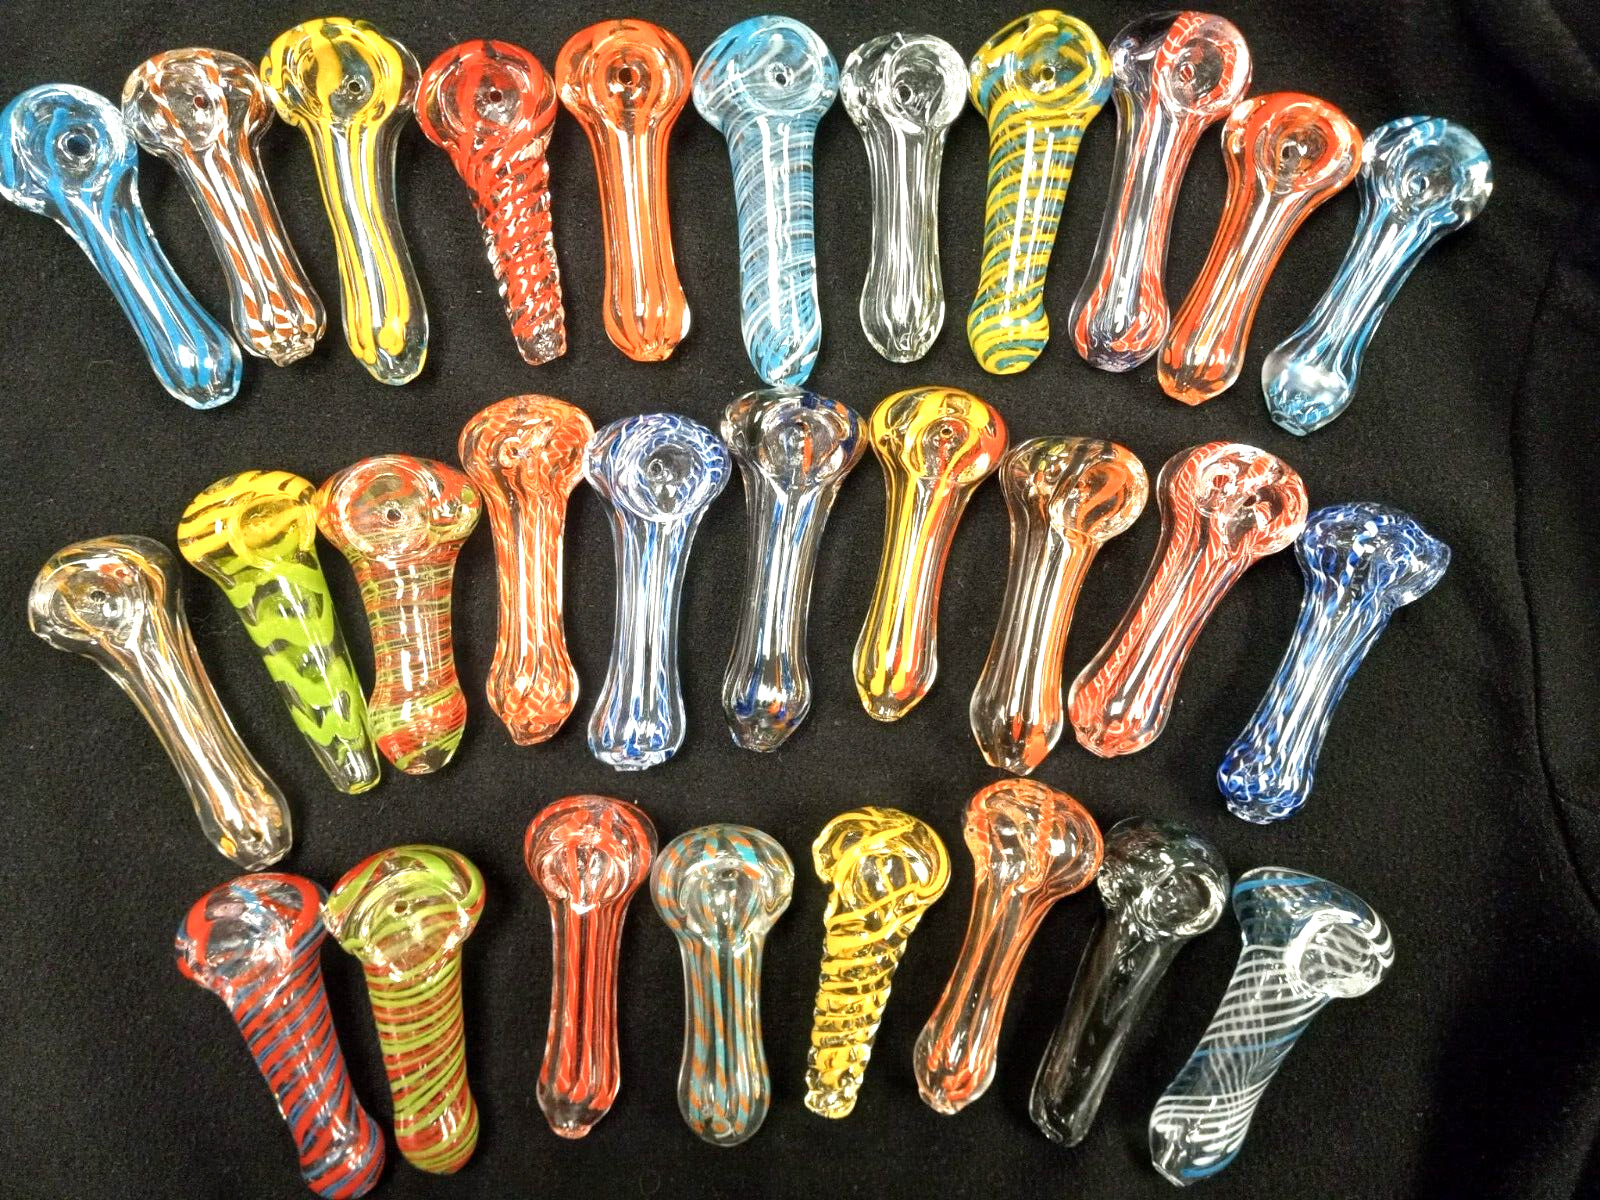 😎💛#1 BEST QUALITY GLASS 2 ½” TOBACCO SMOKING 🧡THICK GLASS SPOON PIPE 💚💜